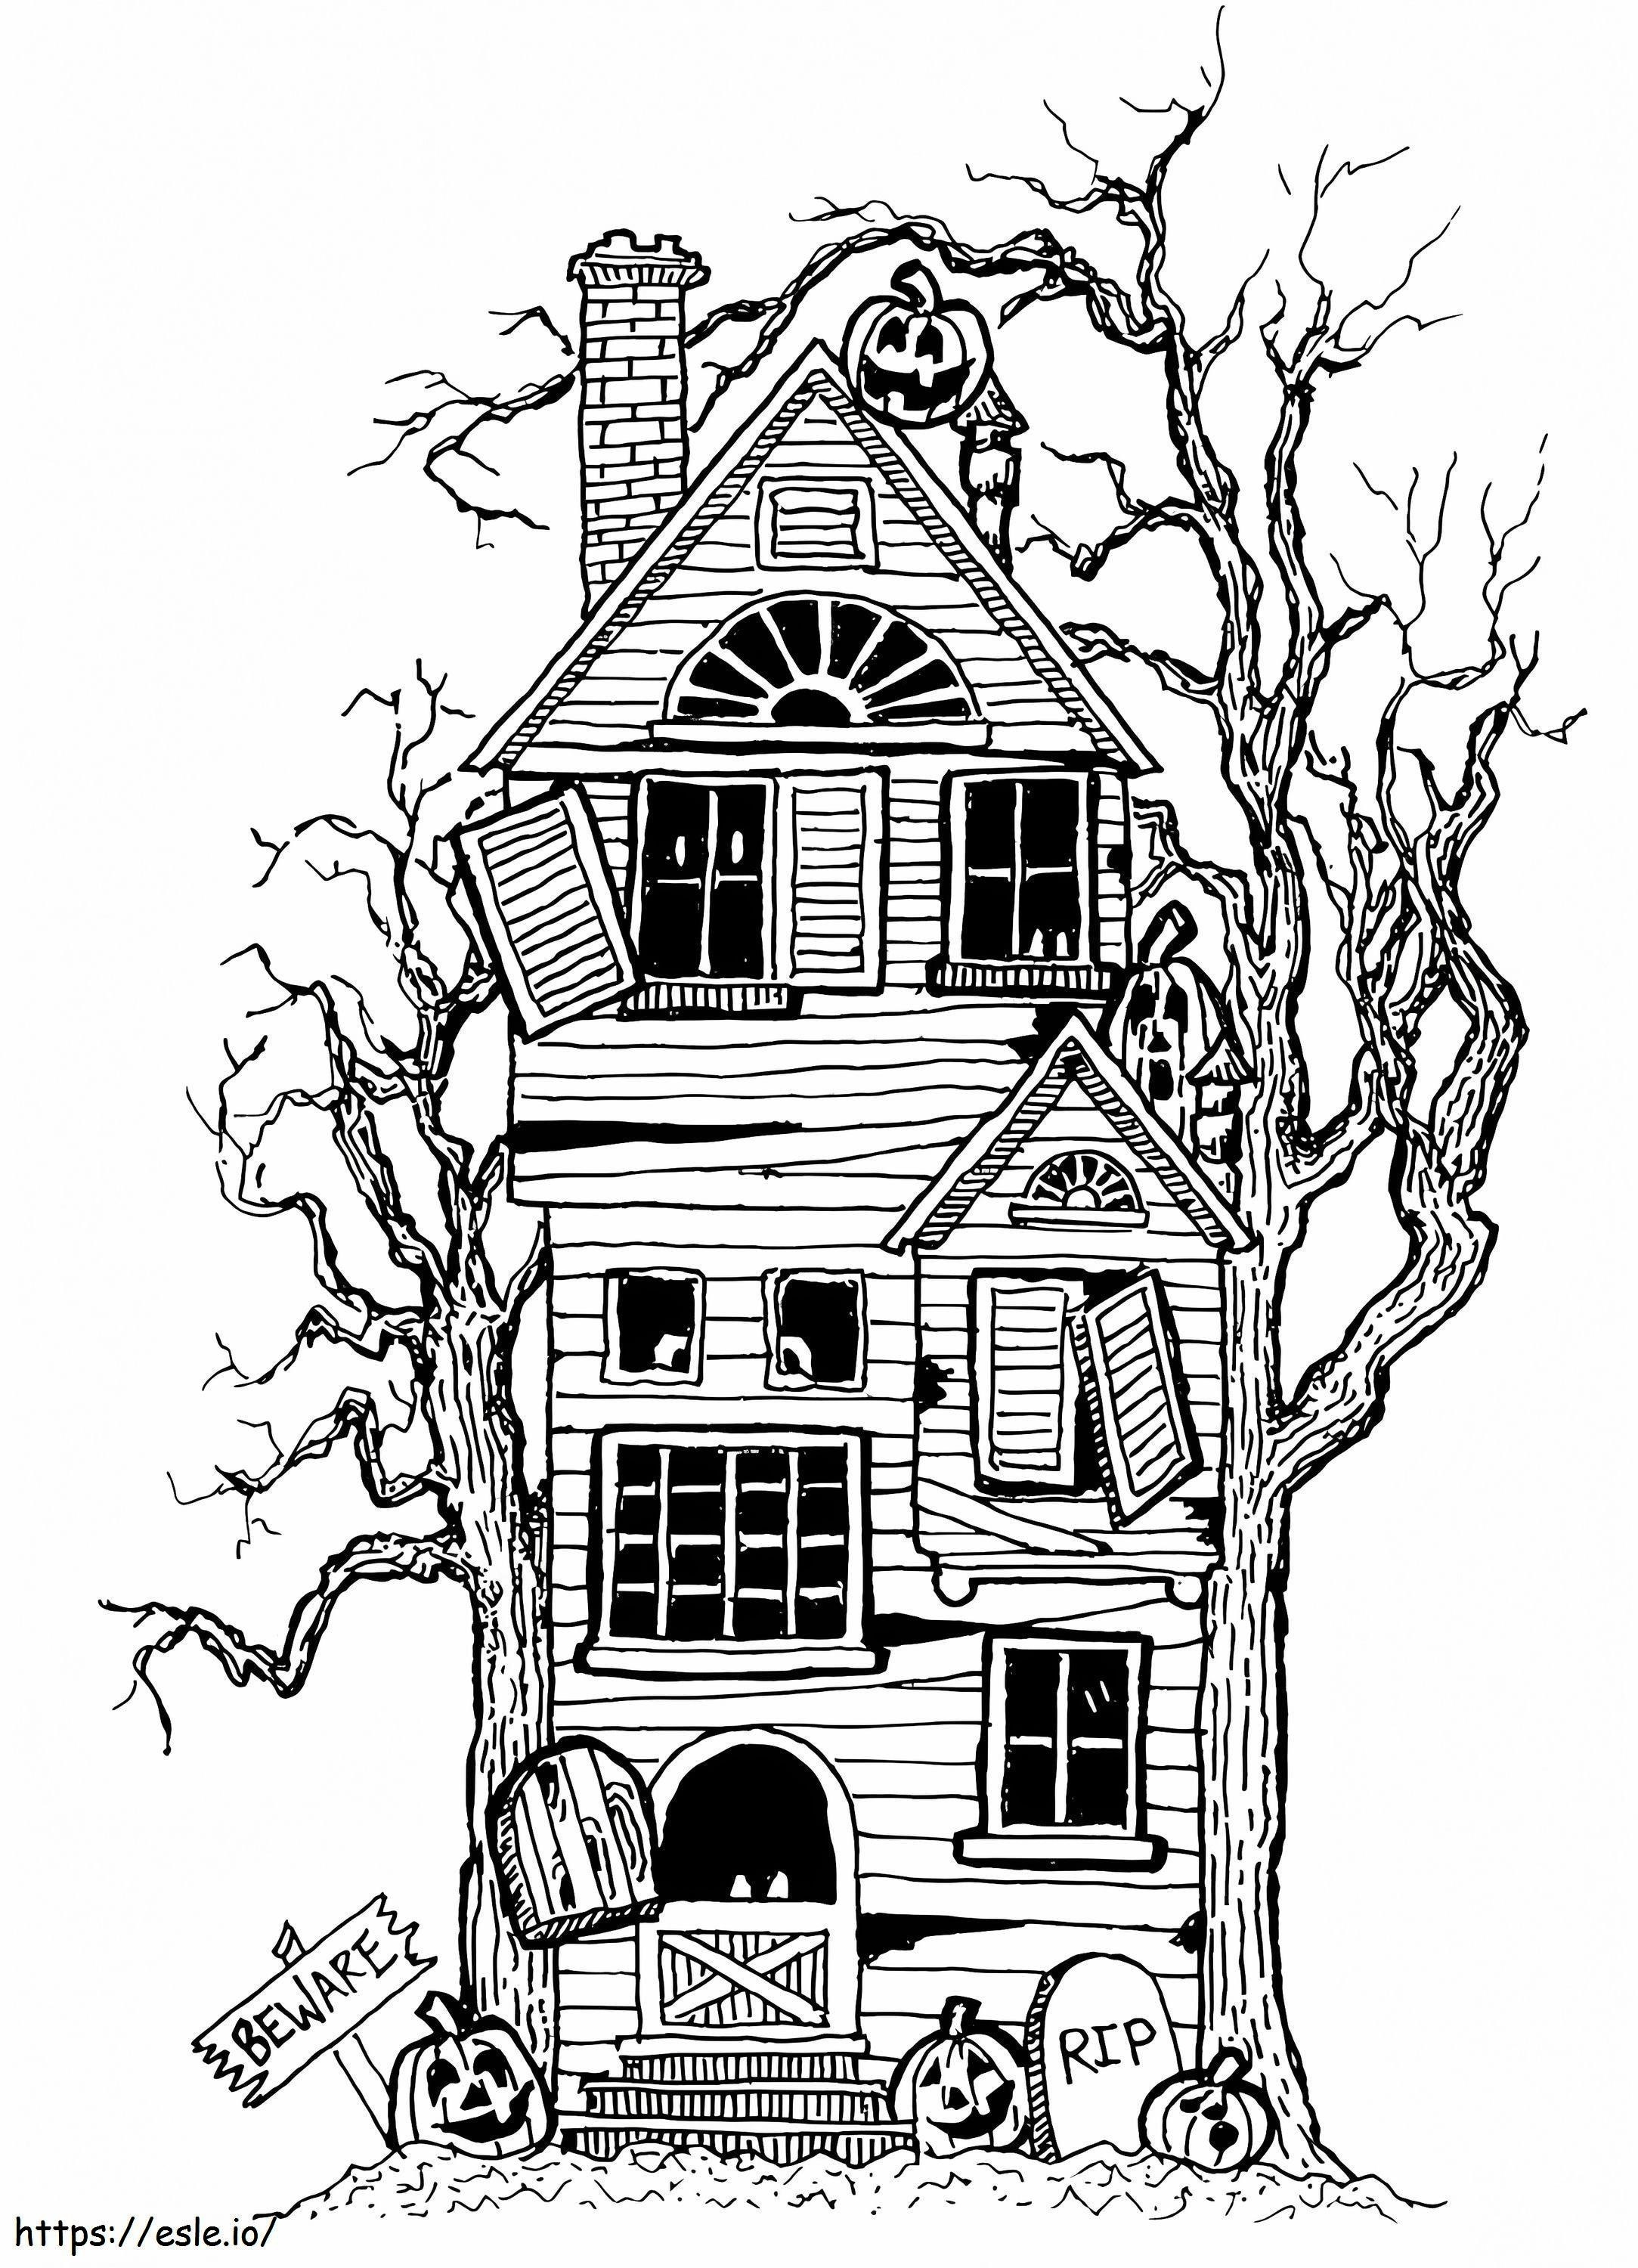 1580439657 Coloring Adult Halloween Big Haunted House coloring page